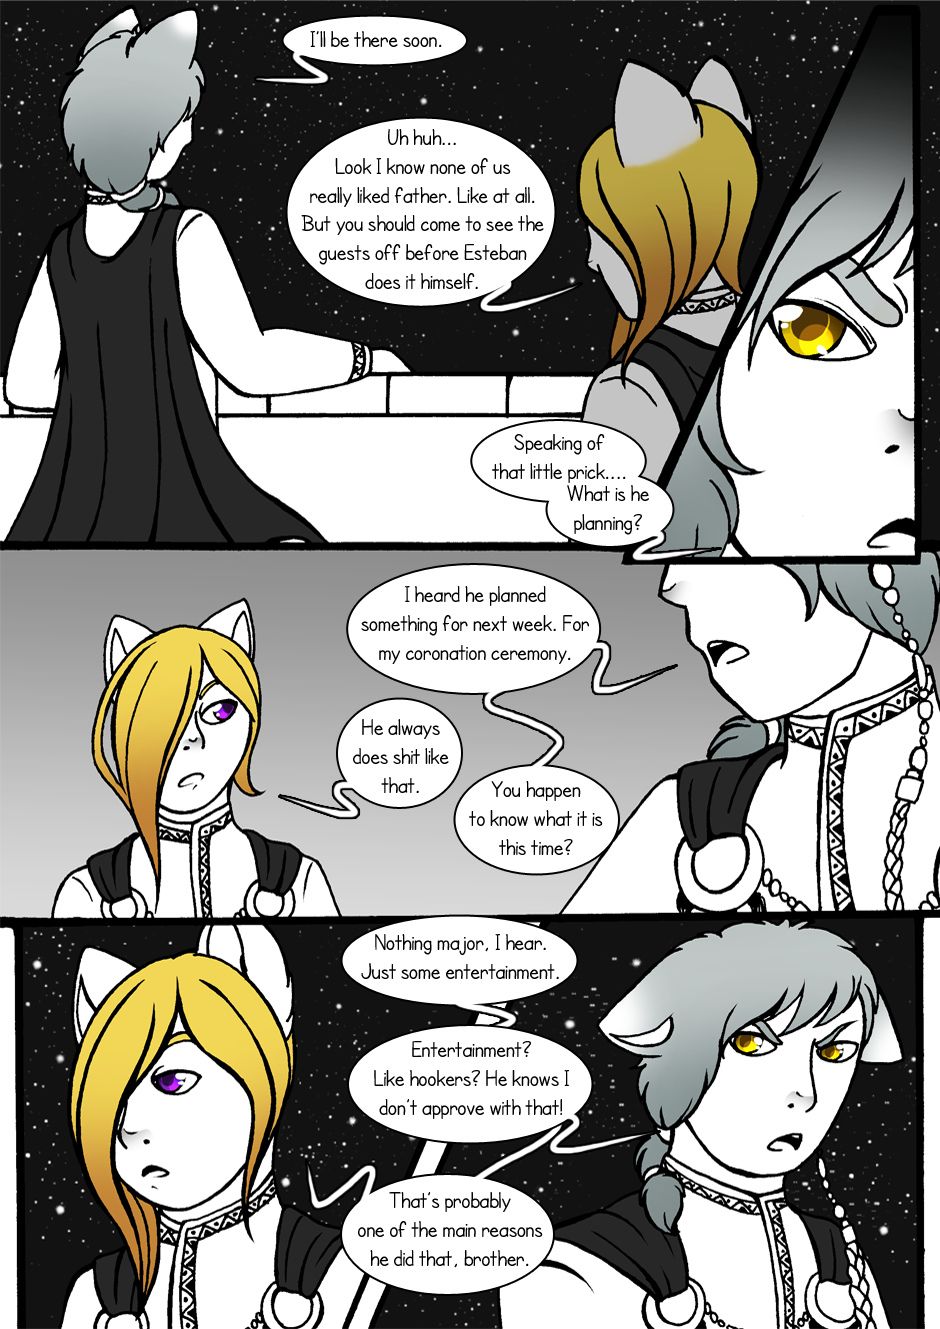 [Jeny-jen94] Between Kings and Queens [Ongoing] 13